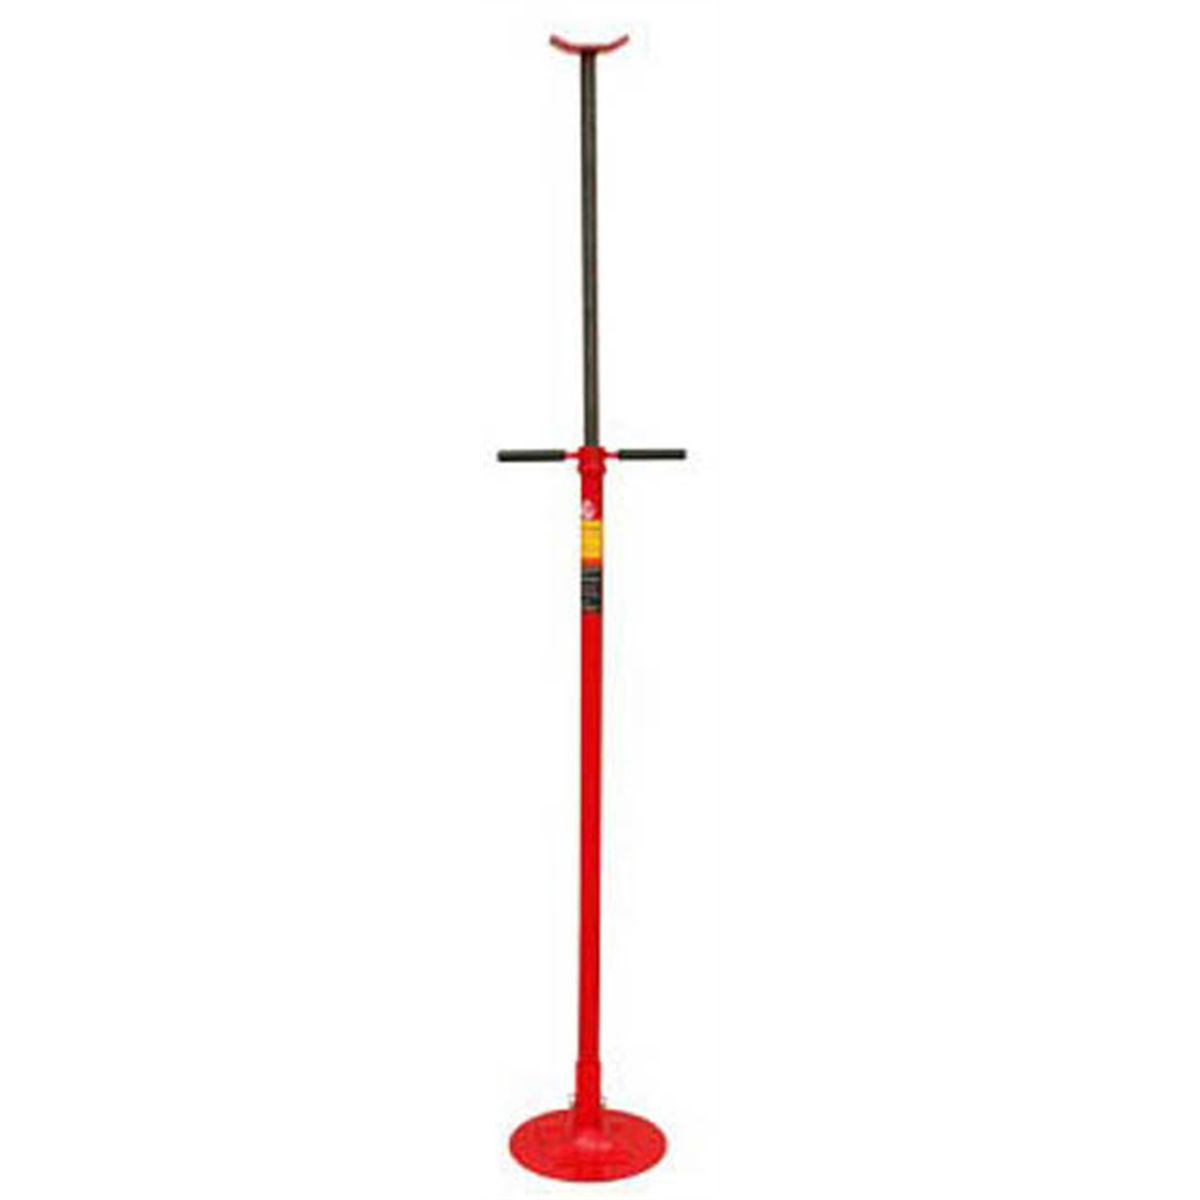 1,500 LB. Tall Jack Standfor use with four post li...